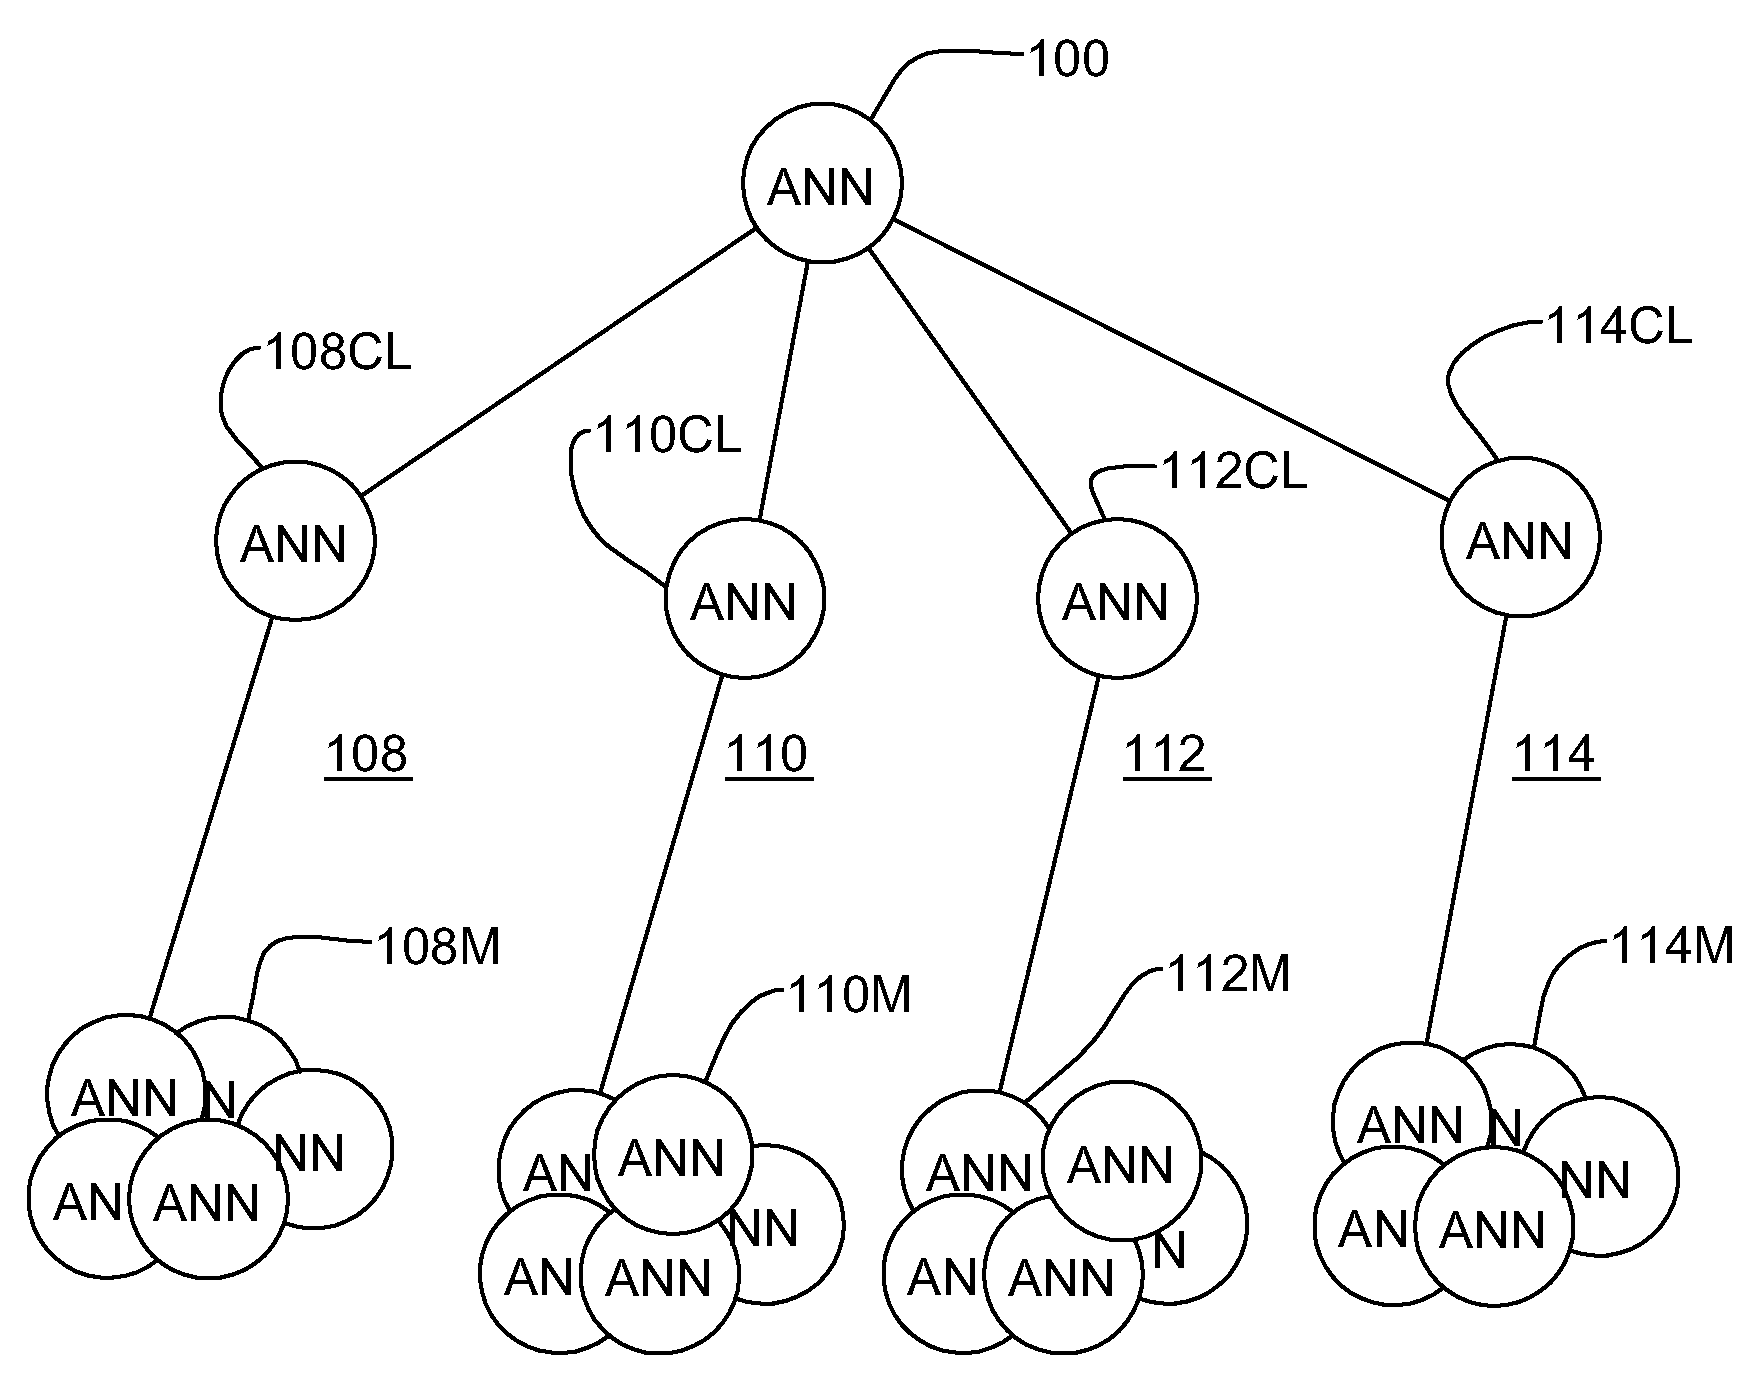 Neural network-based node mobility and network connectivty predictions for mobile ad hoc radio networks